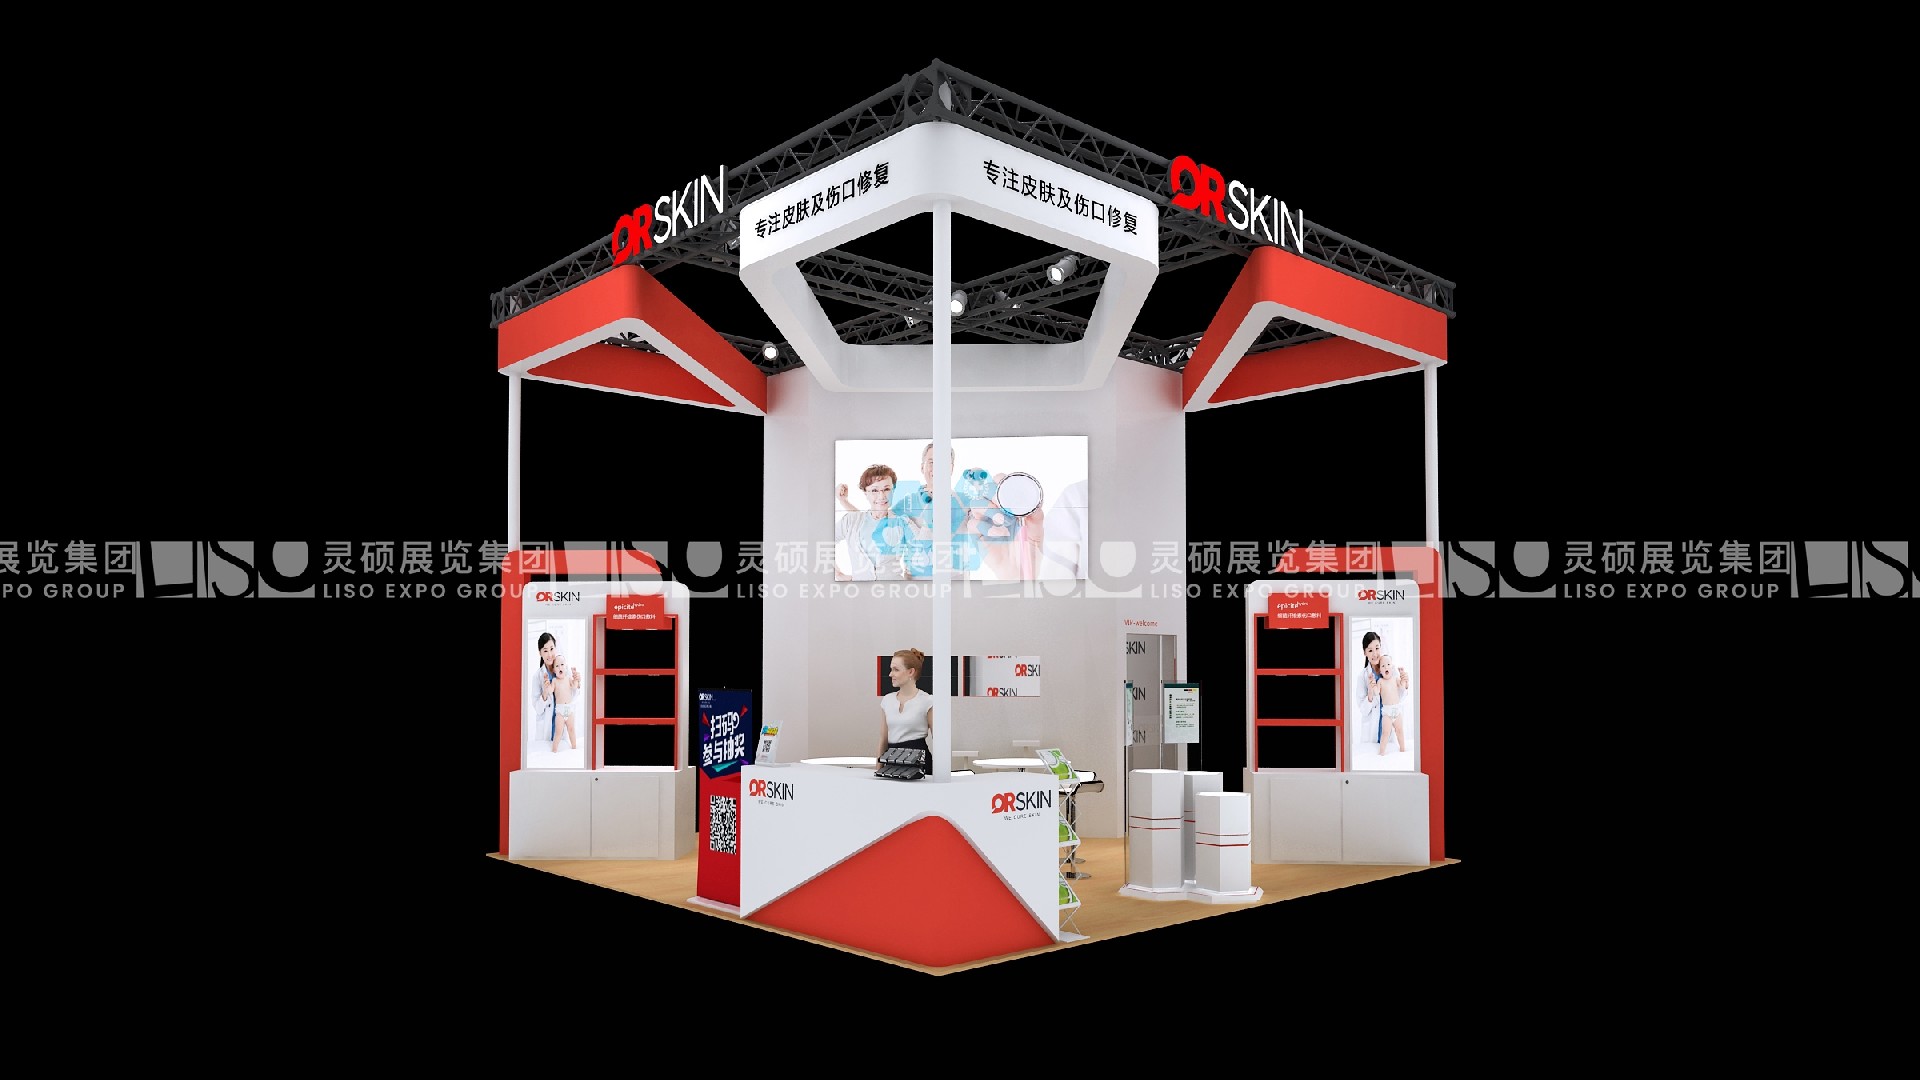 QRSKIN-The 4th CIIE Booth Design Case